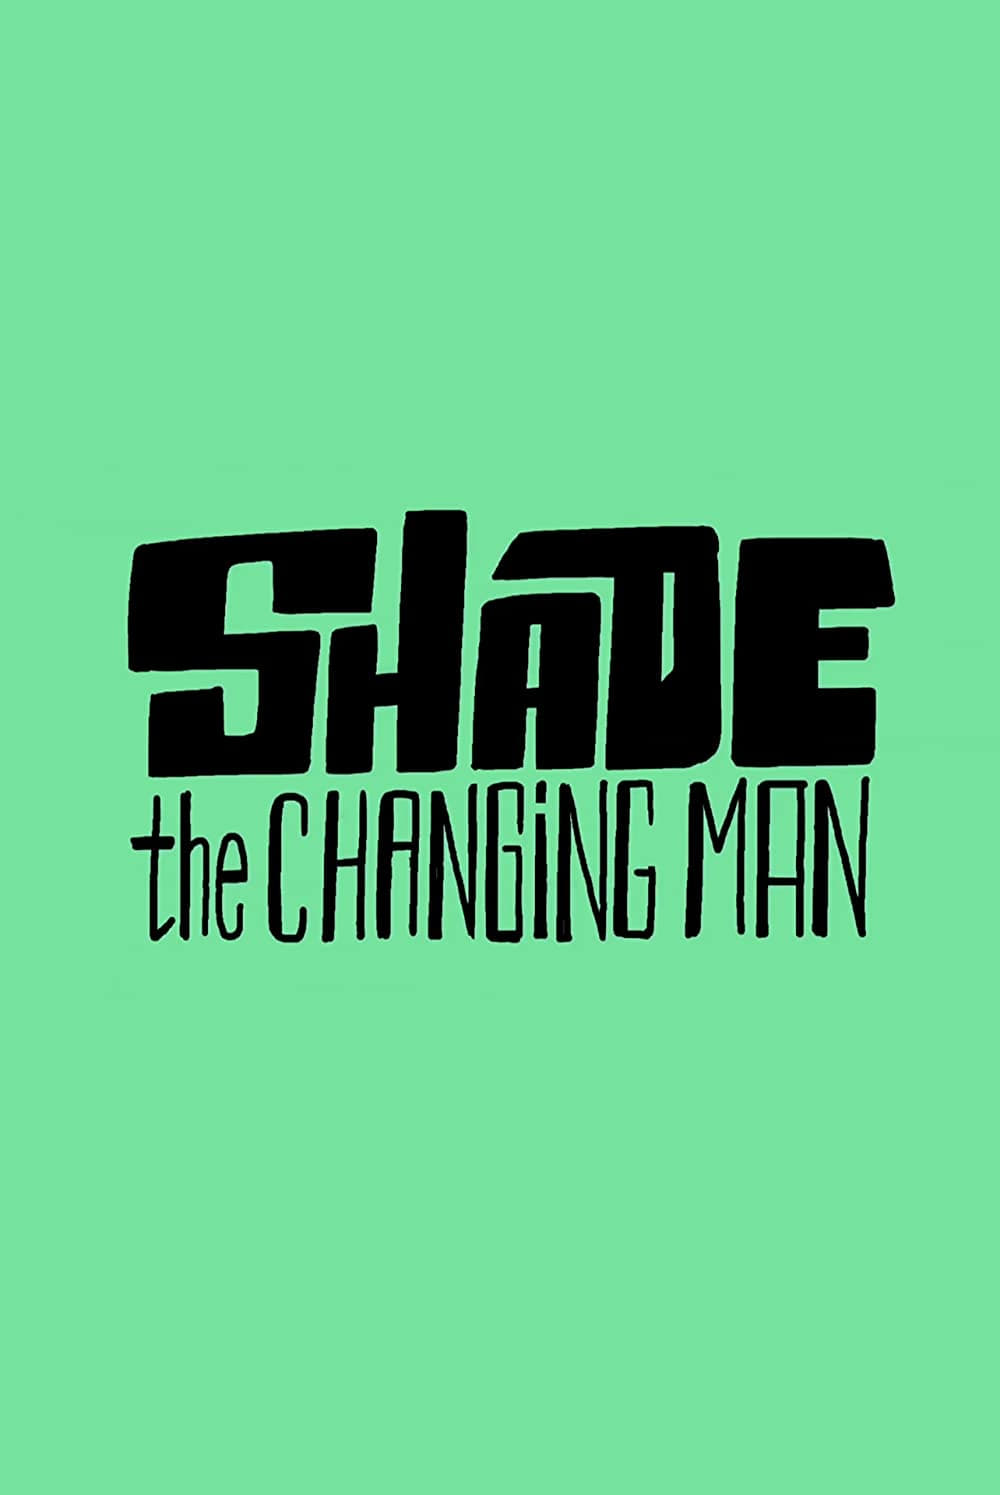 Shade: The Changing Man film